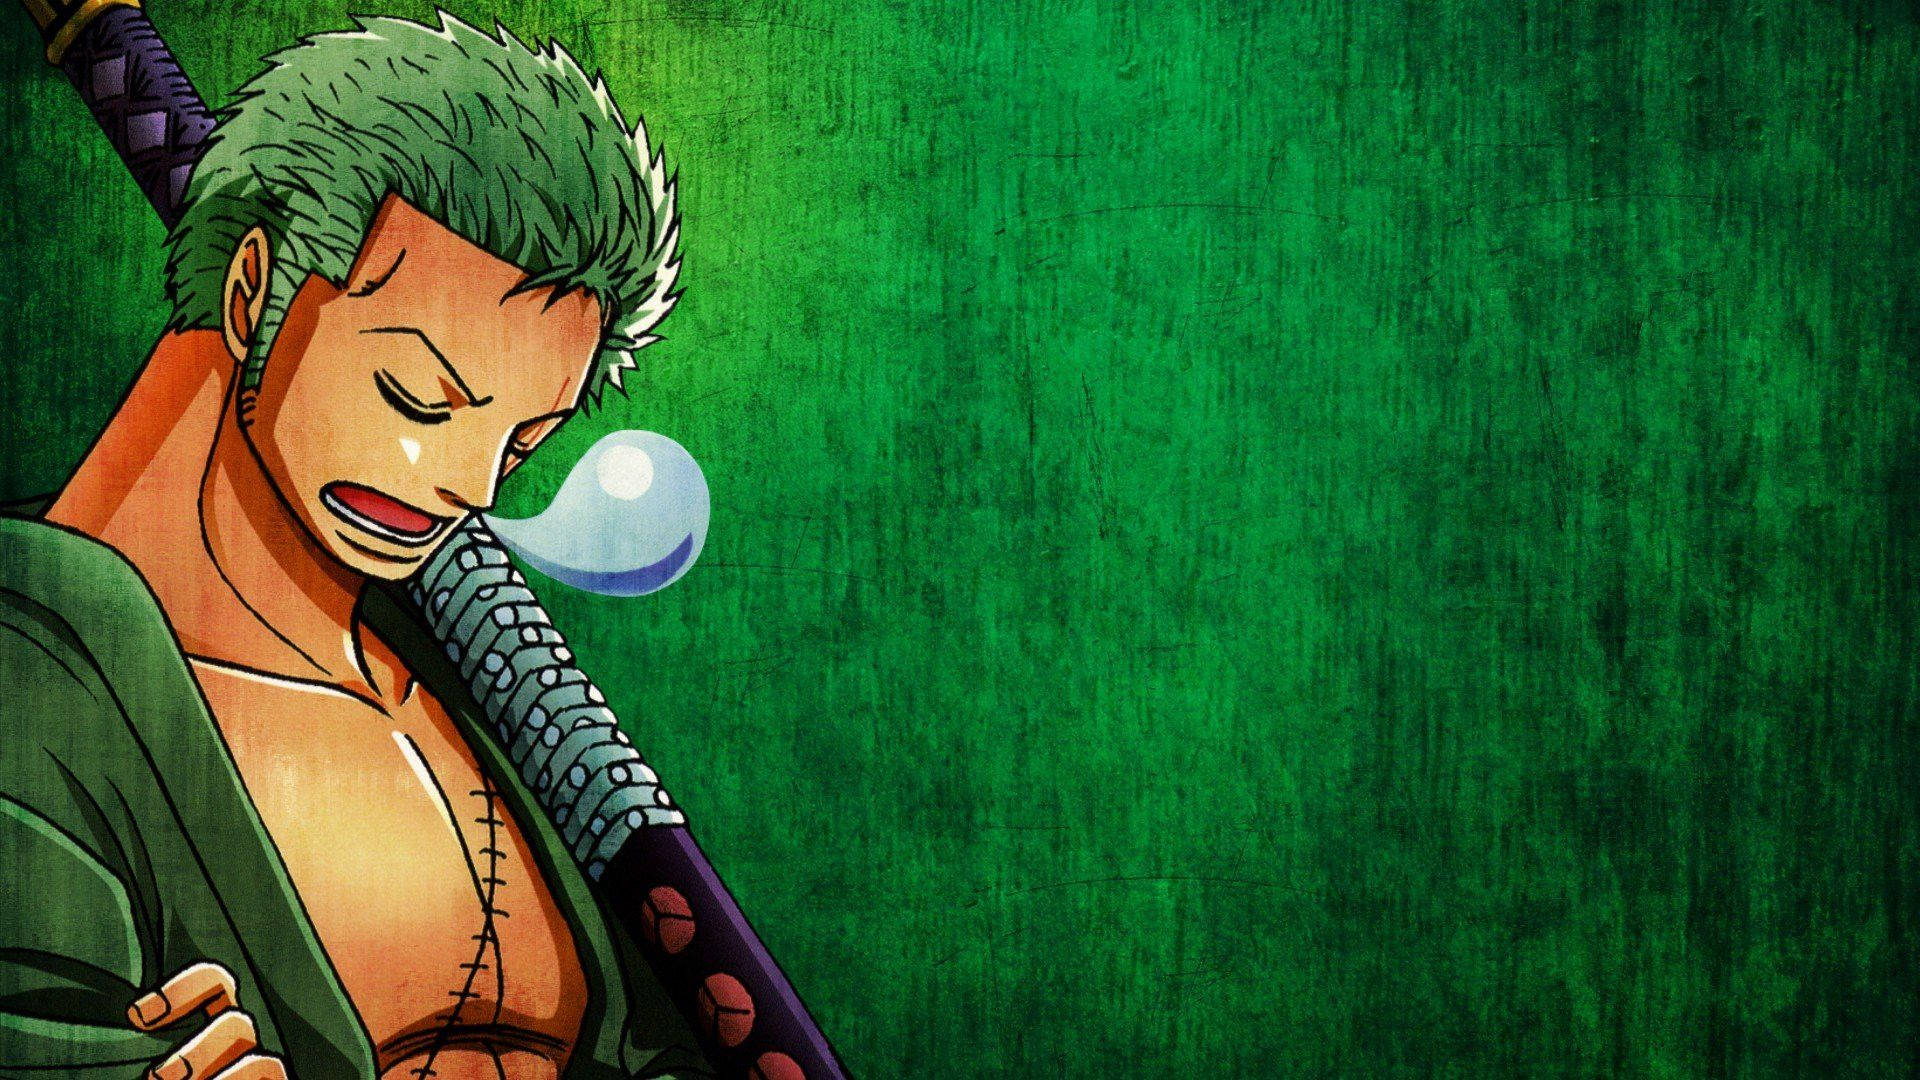 Zoro dream – the one behind the iconic One Piece. Wallpaper